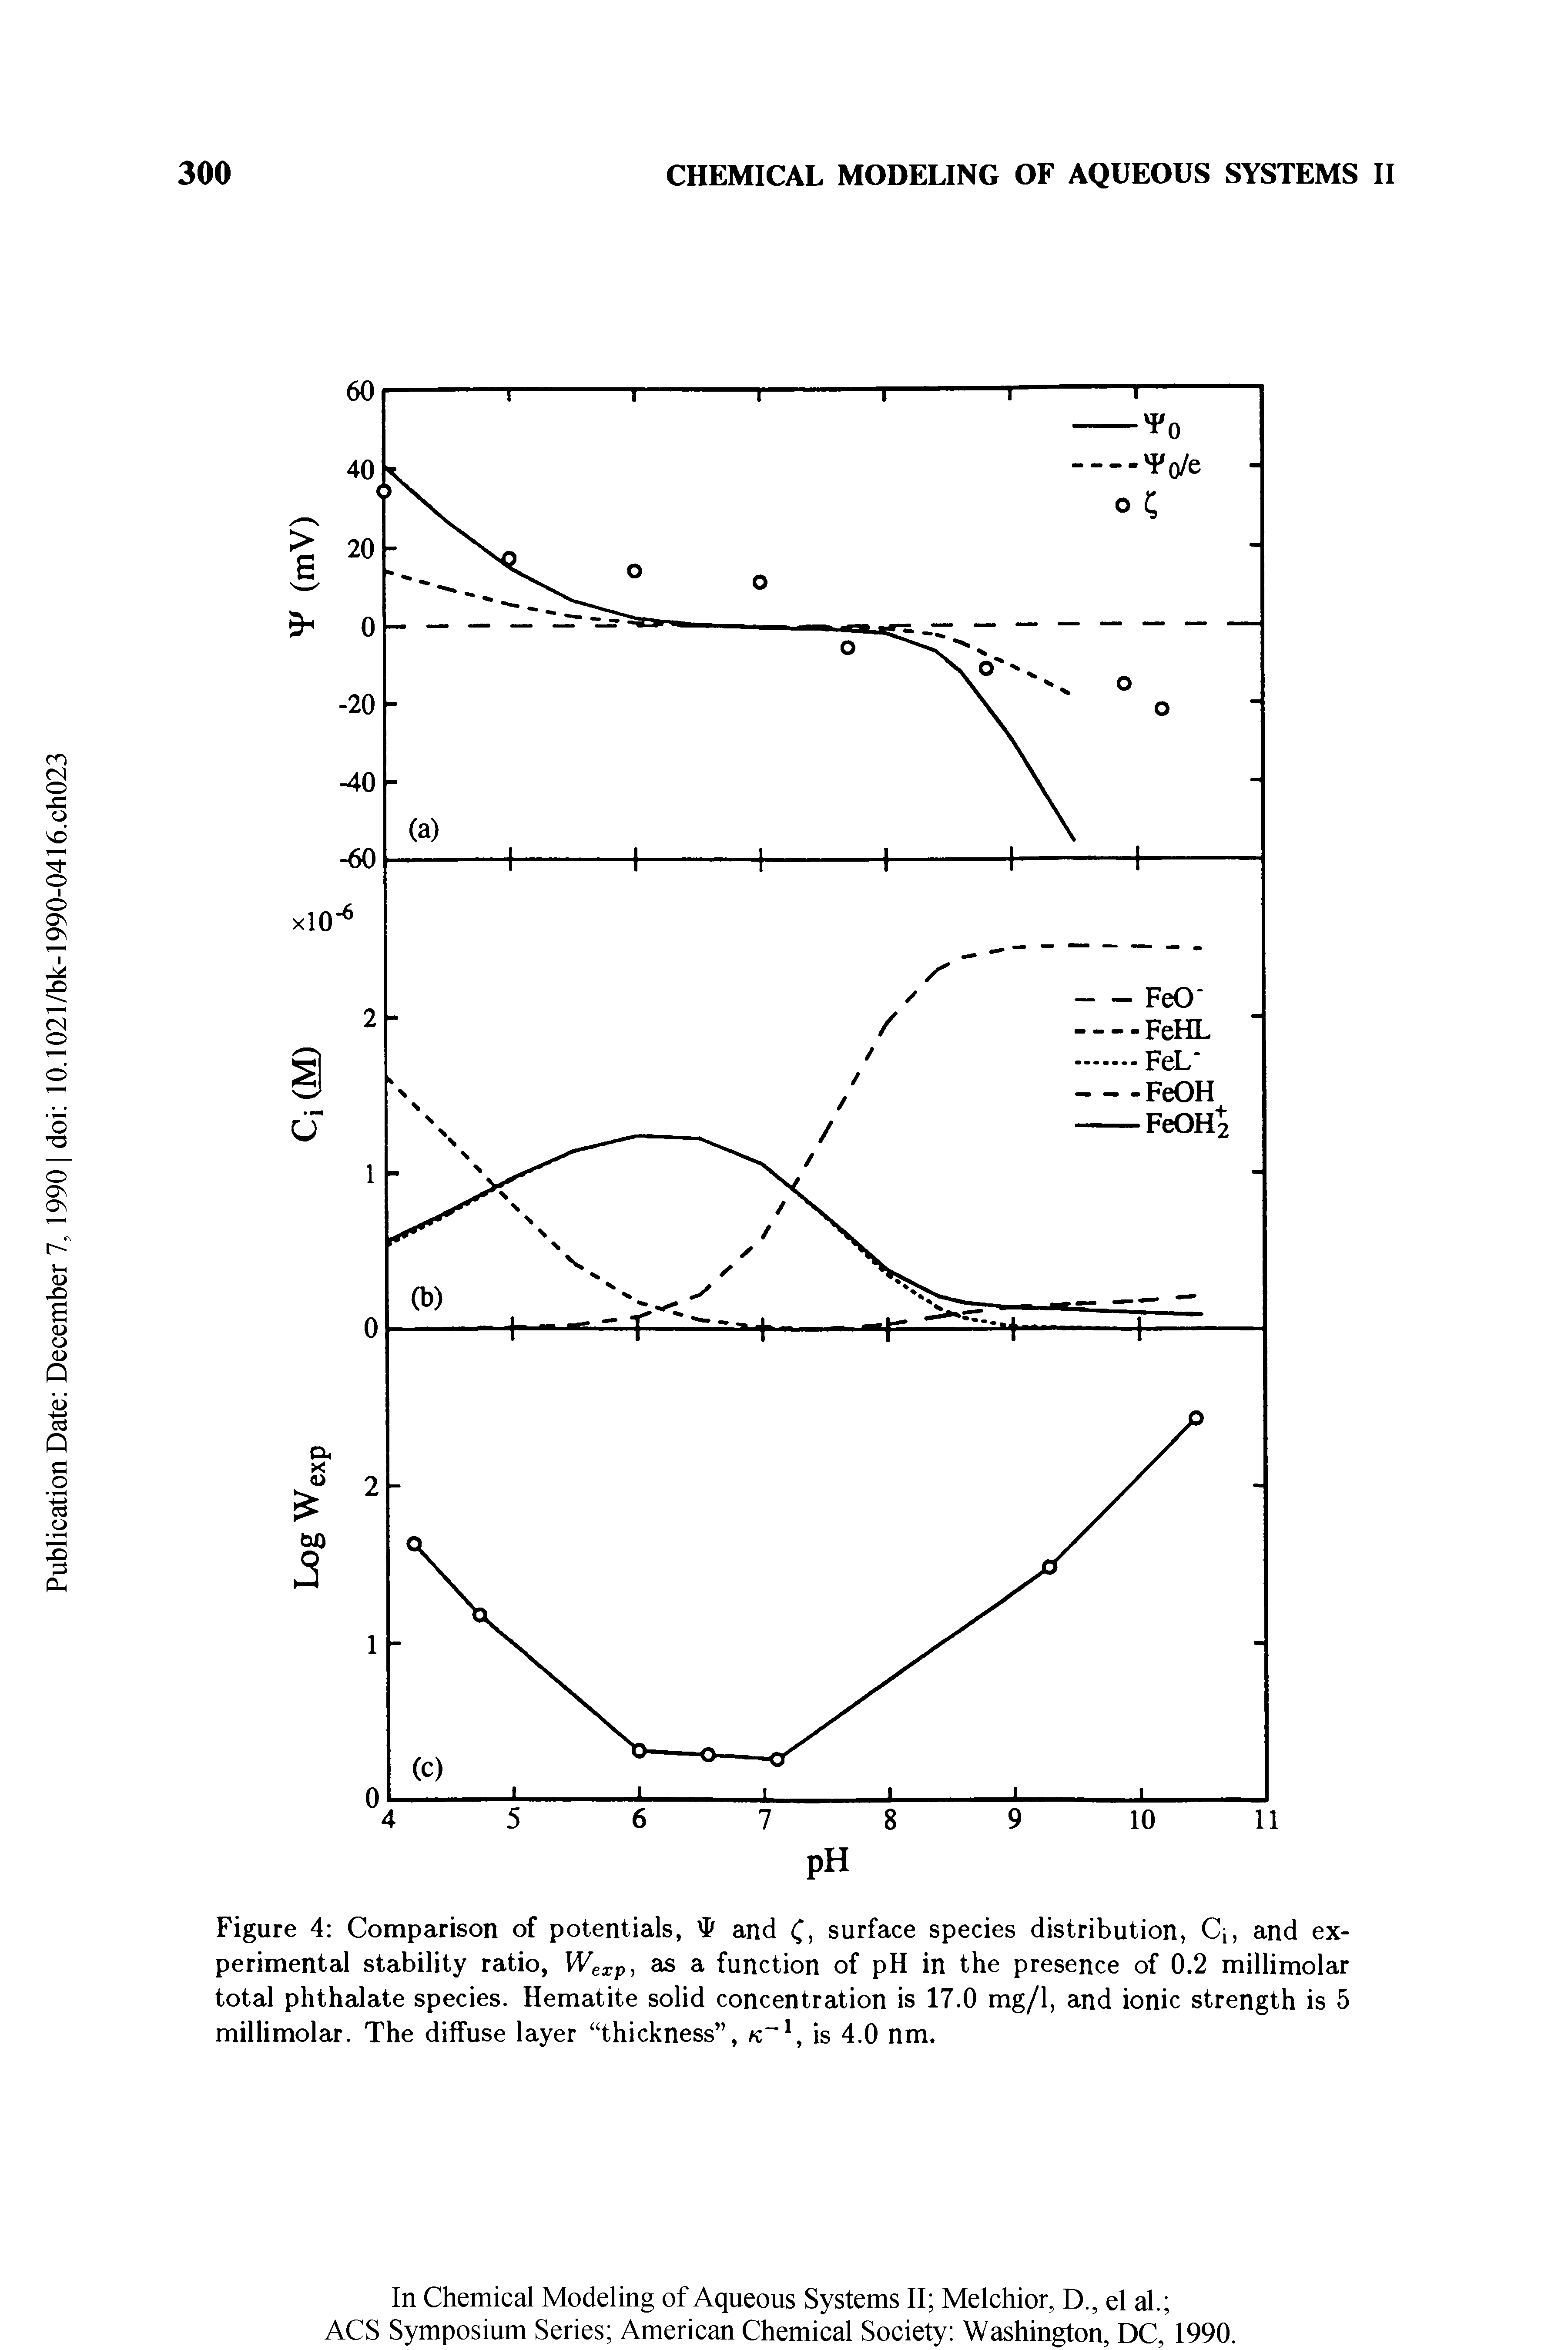 Figure 4 Comparison of potentials, and surface species distribution, Ci, and experimental stability ratio, Wexp, as a function of pH in the presence of 0.2 millimolar total phthalate species. Hematite solid concentration is 17.0 mg/1, and ionic strength is 5 millimolar. The diffuse layer thickness , /c , is 4.0 nm.